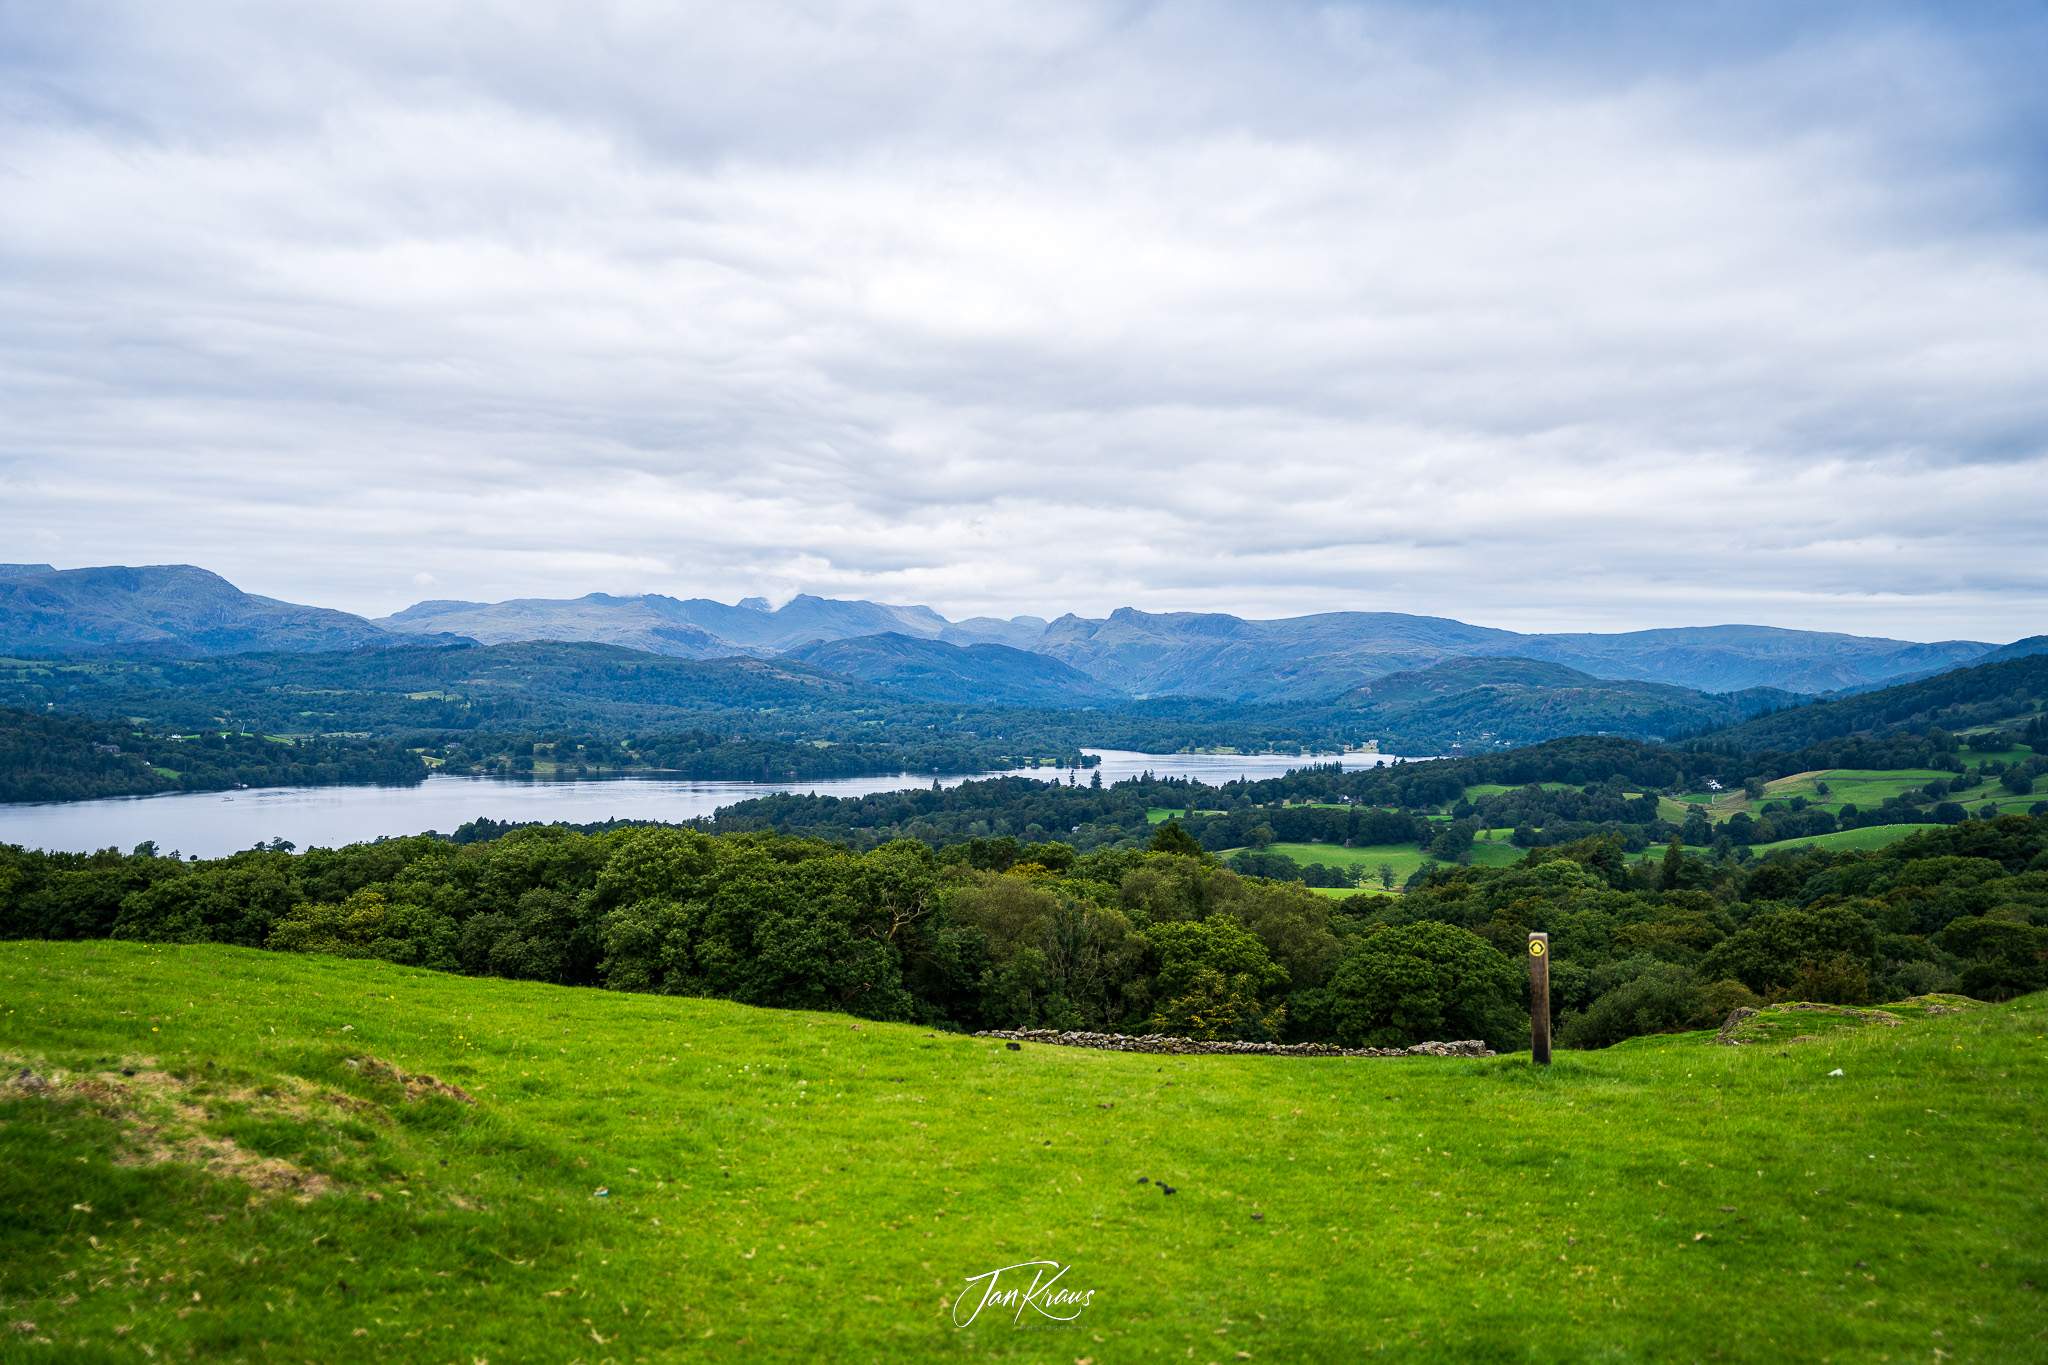 Views from Orrest Head walk at Windermere, Lake District, England, UK